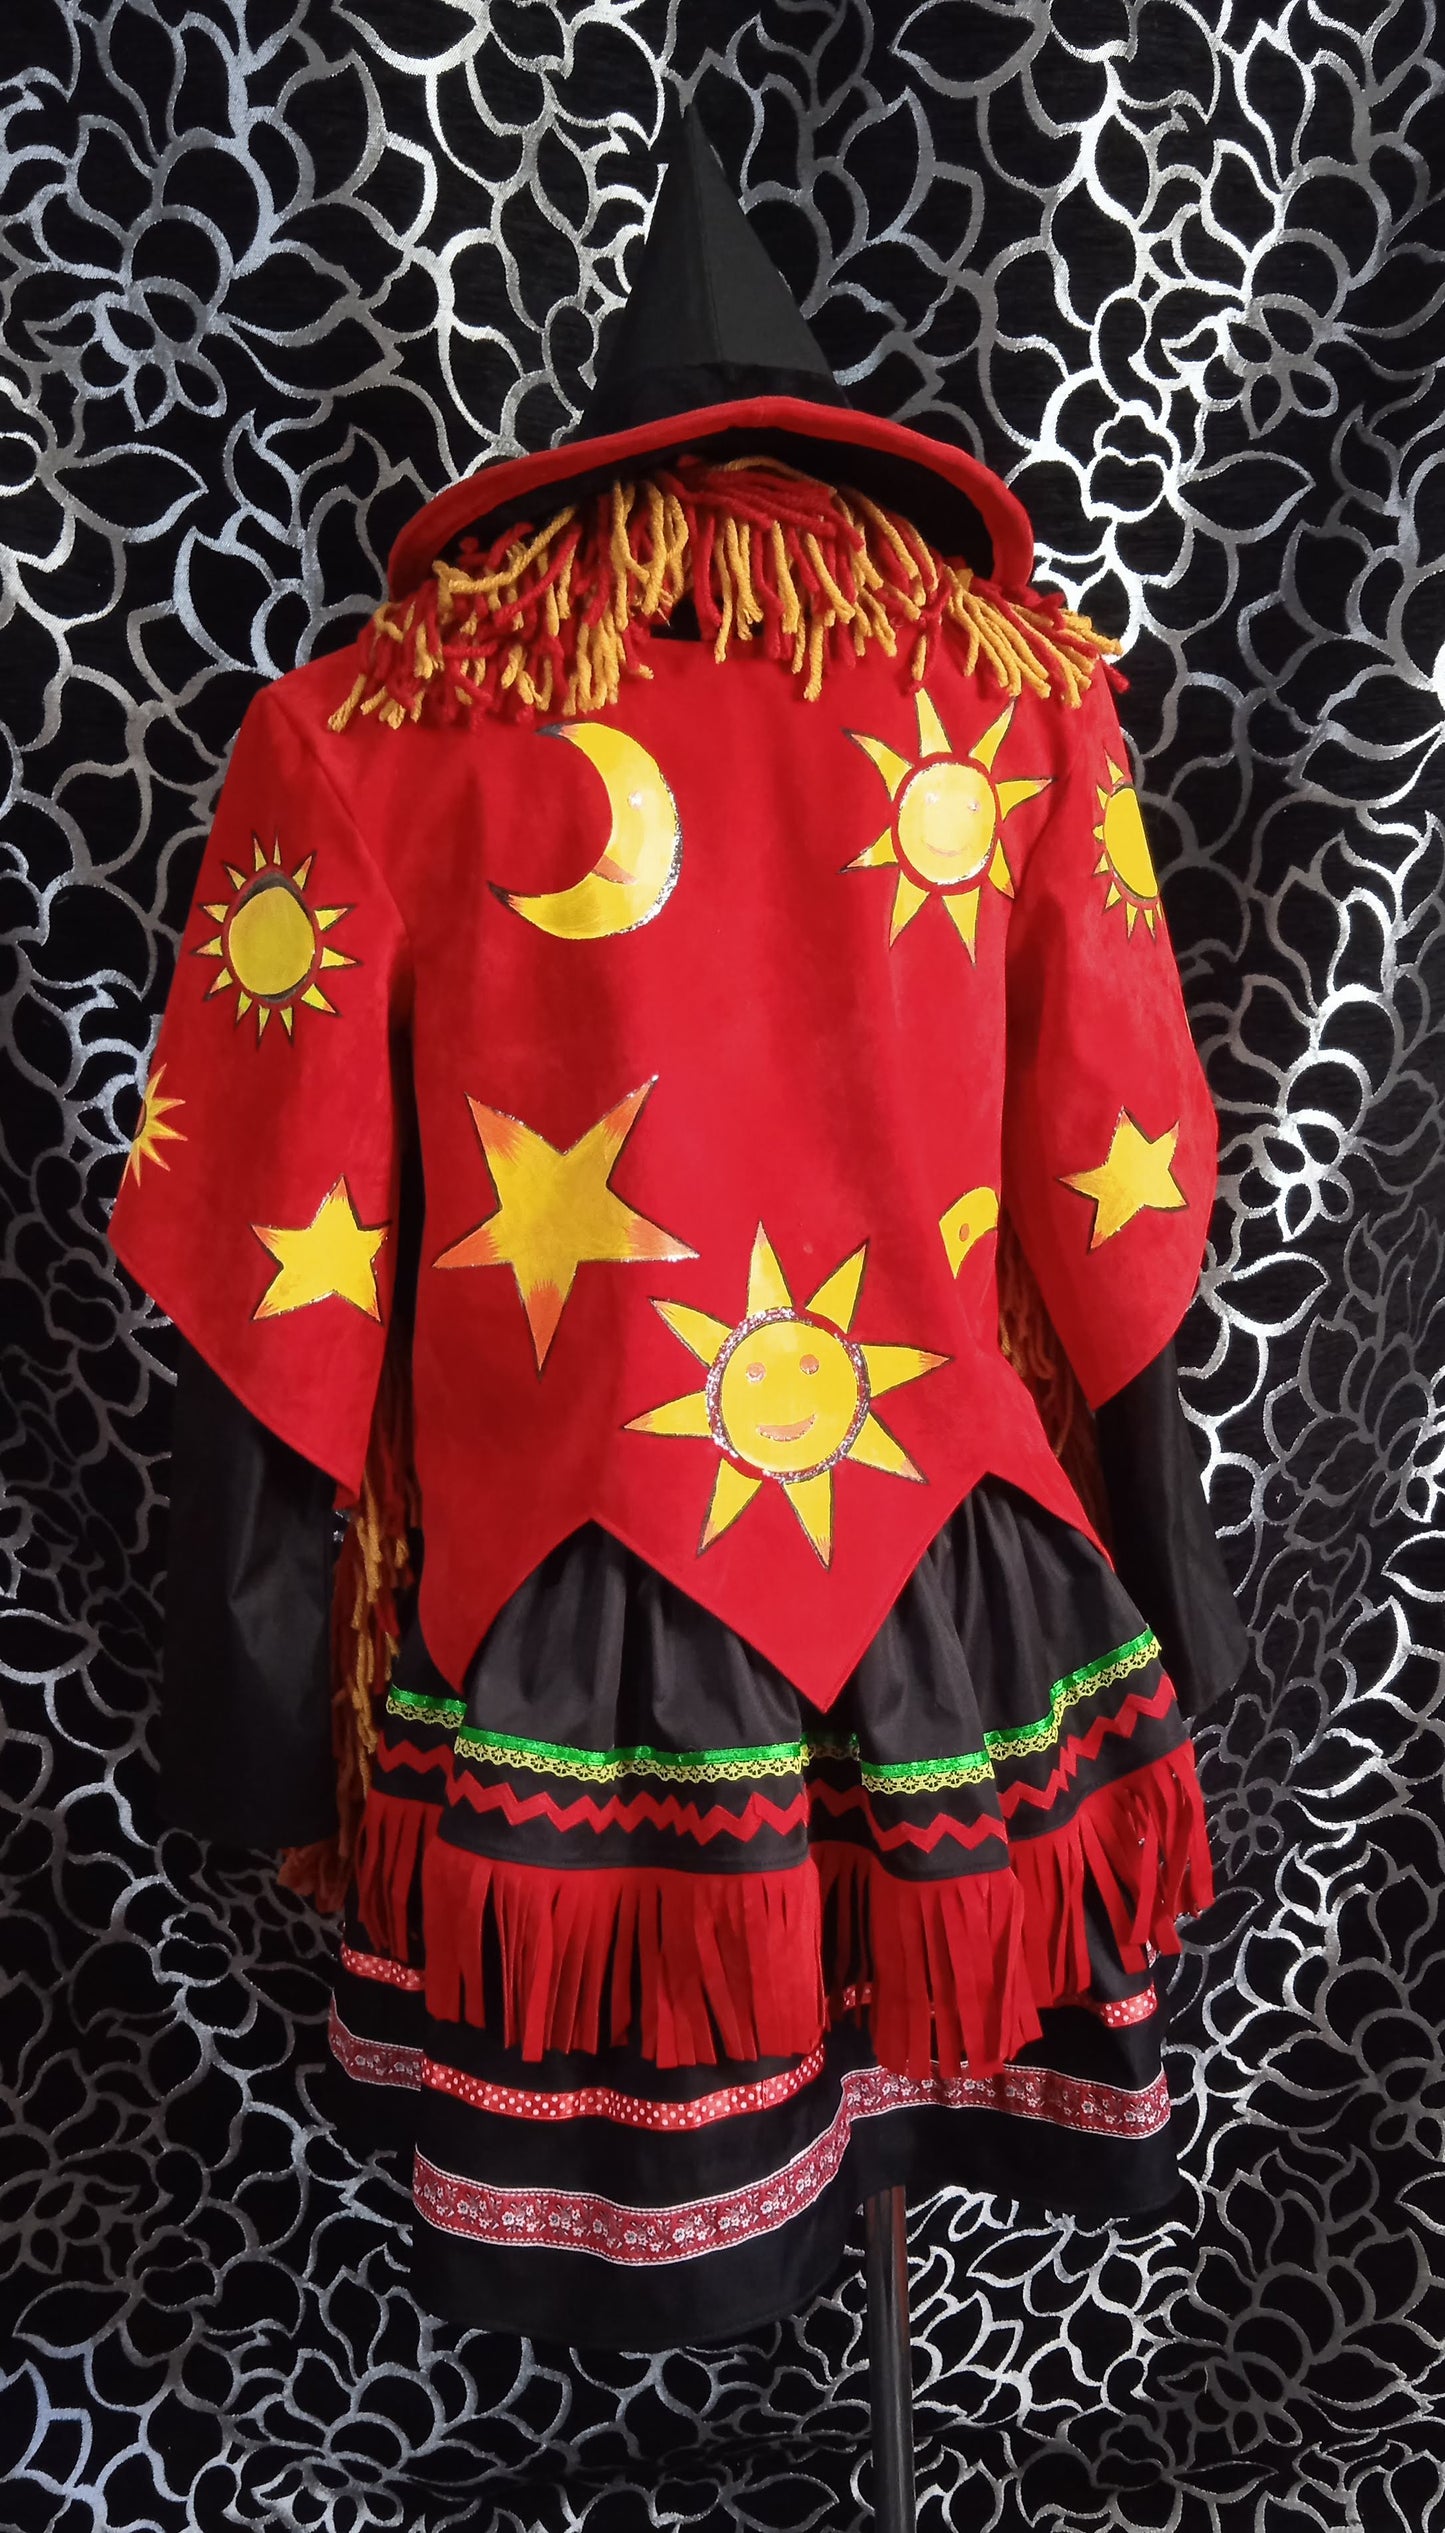 Hocus Pocus Dani Dennison cosplay outfit / cosplay dress / halloween outfit / handmade cosplay / movie cosplay / halloween dress